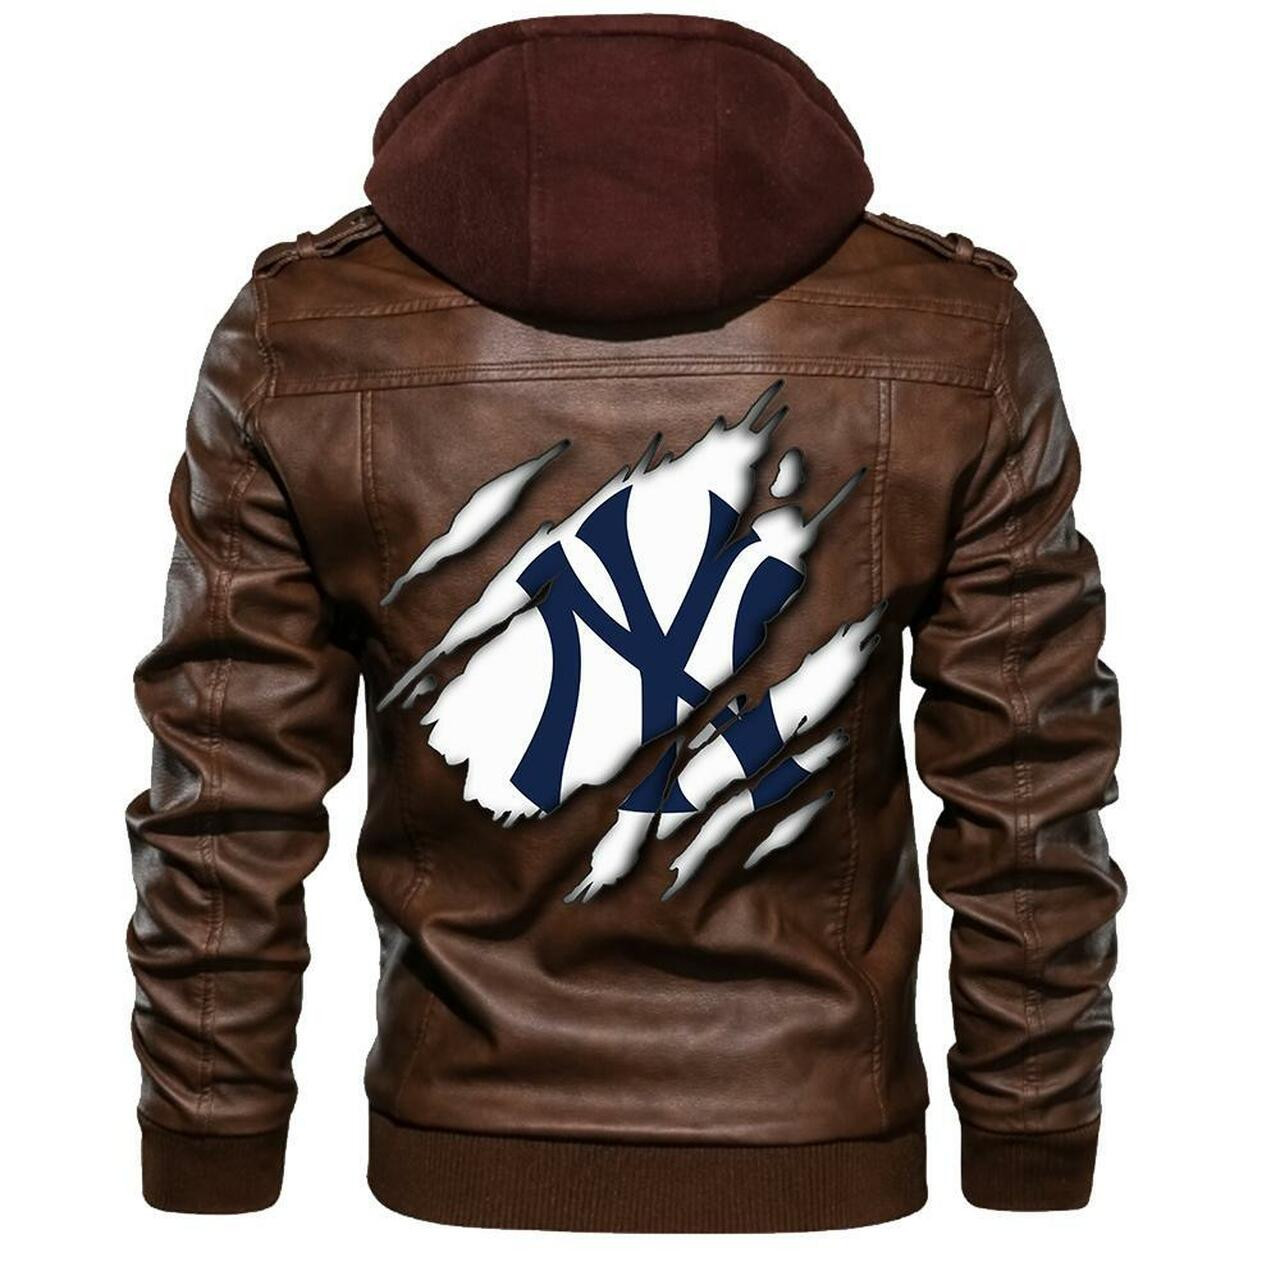 Nice leather jacket For you 257